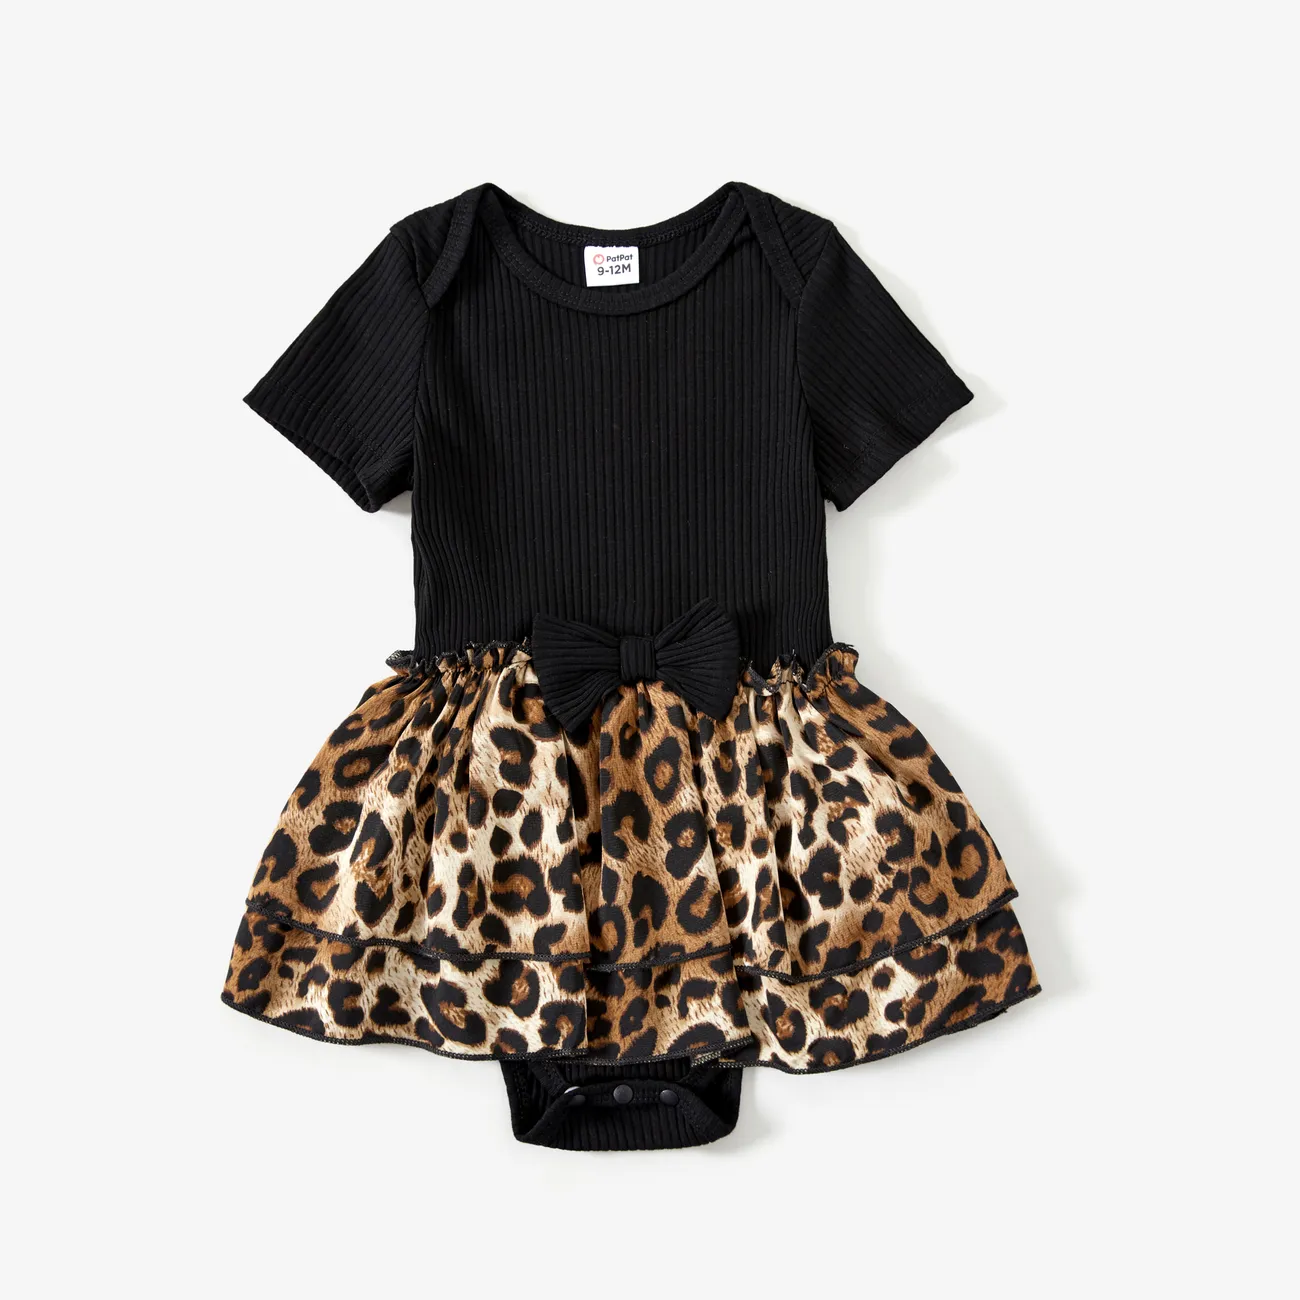 Mommy and Me Rib Black Top and Leopard Print Tiered Pleated Skirt Sets Black big image 1